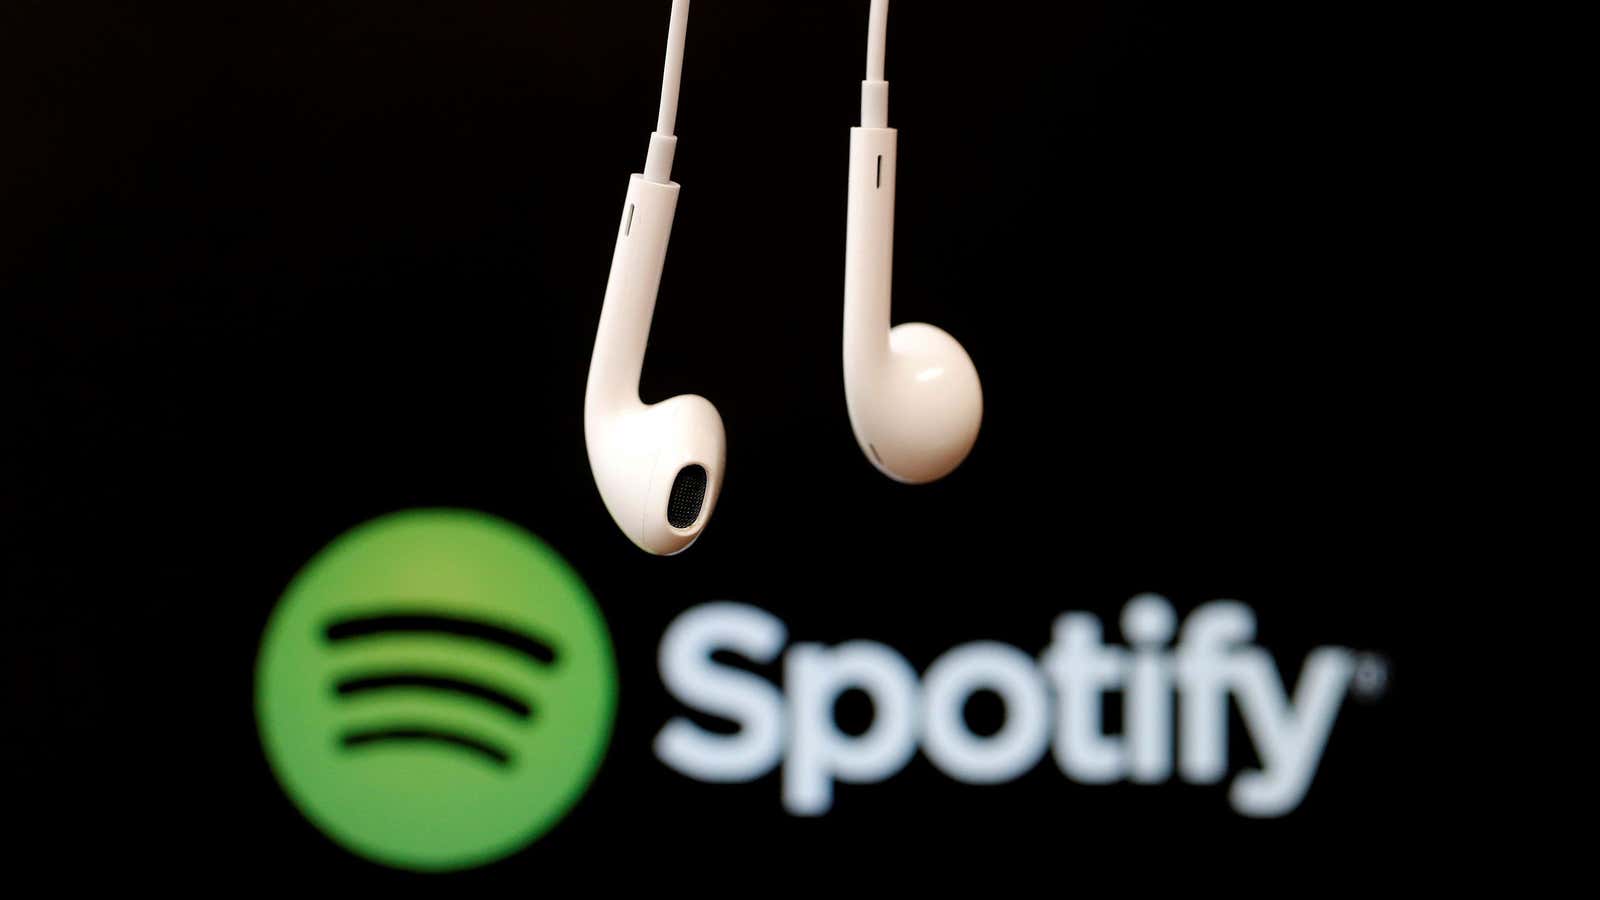 Spotify has turned many podcast listeners into paid subscribers.